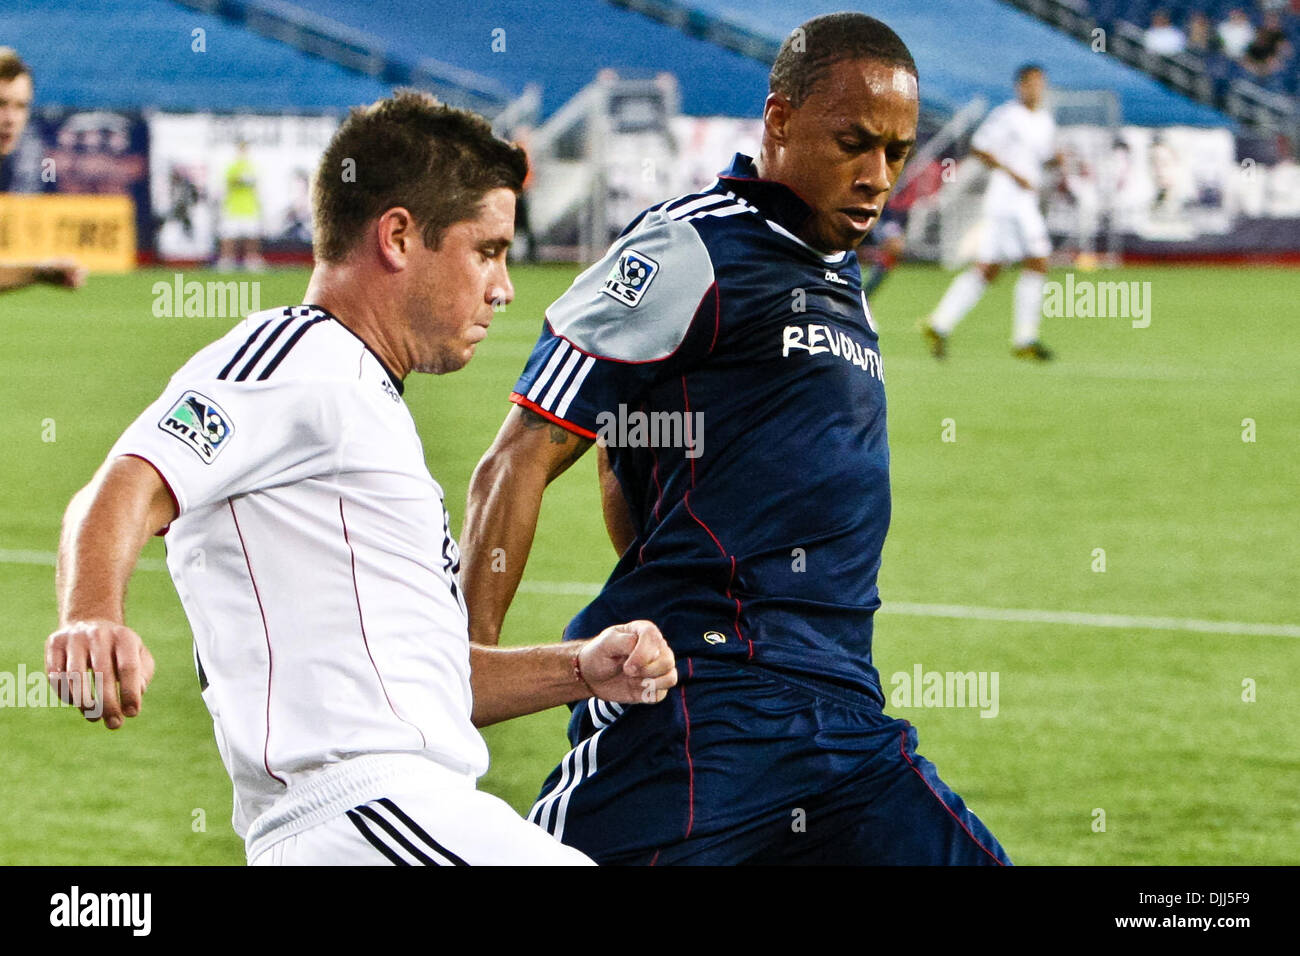 Aug. 07, 2010 - Foxboro, Massachusetts, United States of America - 7  August, 2010:  D.C. United Defender DEVON MC TAVISH (18) and New England Revolution Midfielder KHANO SMITH  (18) battle for control of the ball before it goes out of bounds during second half of match play at  Gillette Stadium in Foxboro, Massachusetts.  New England Revolution defeated D.C. United 1-0..Mandatory  Stock Photo